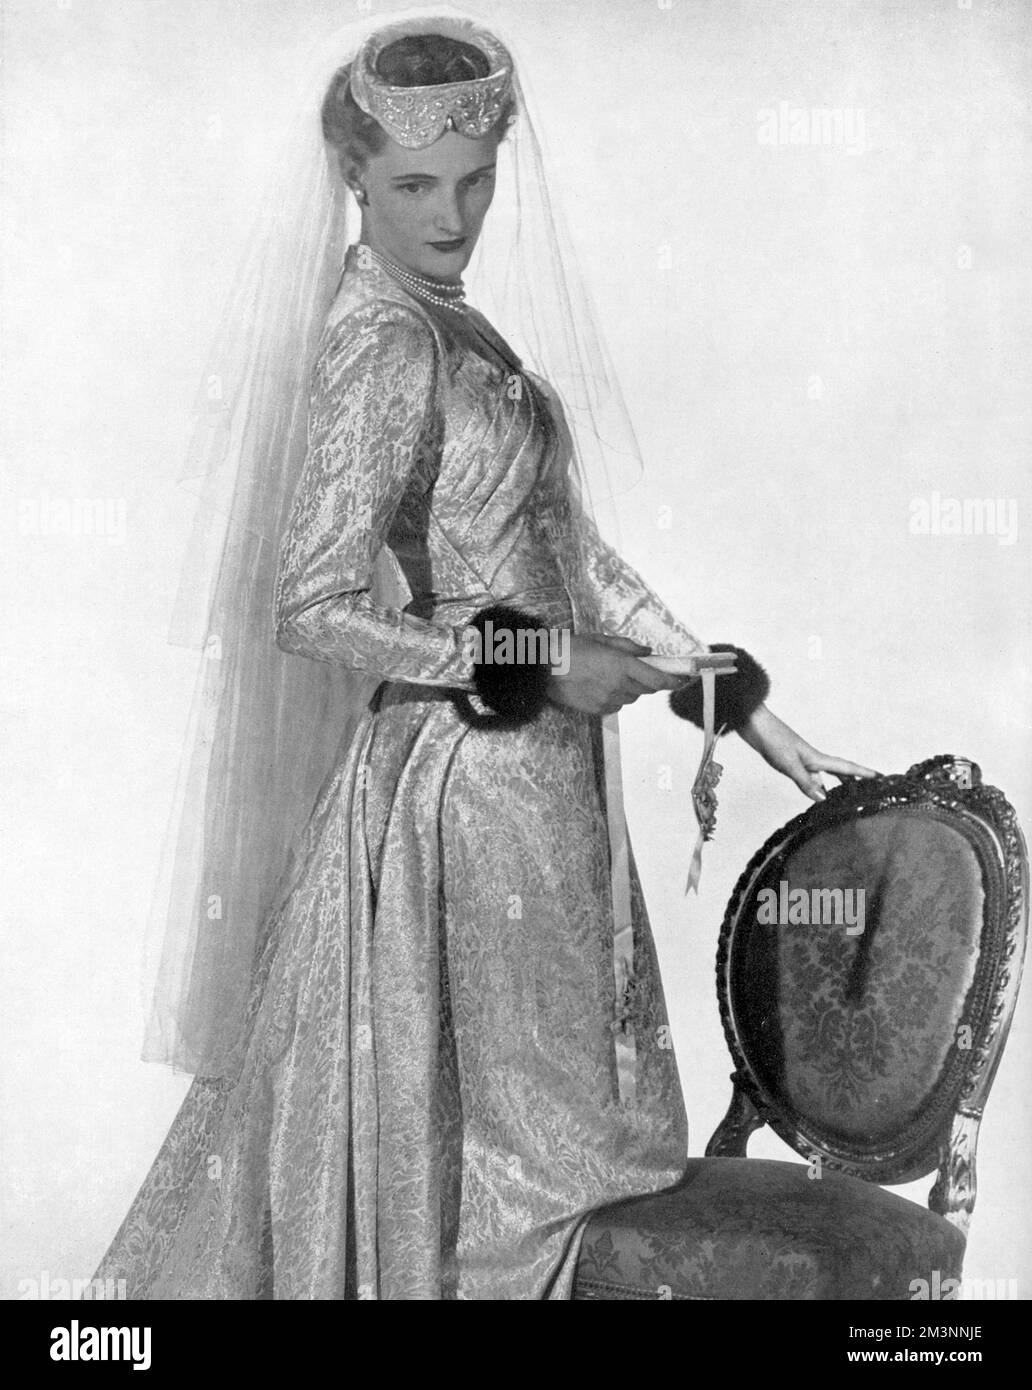 A wedding dress of pale gold and ivory patterned brocade with a prettily folded bodice and a train cut in one with the skirt.  The long, tight-fitting sleeves are cuffed with mink.     Date: 1953 Stock Photo